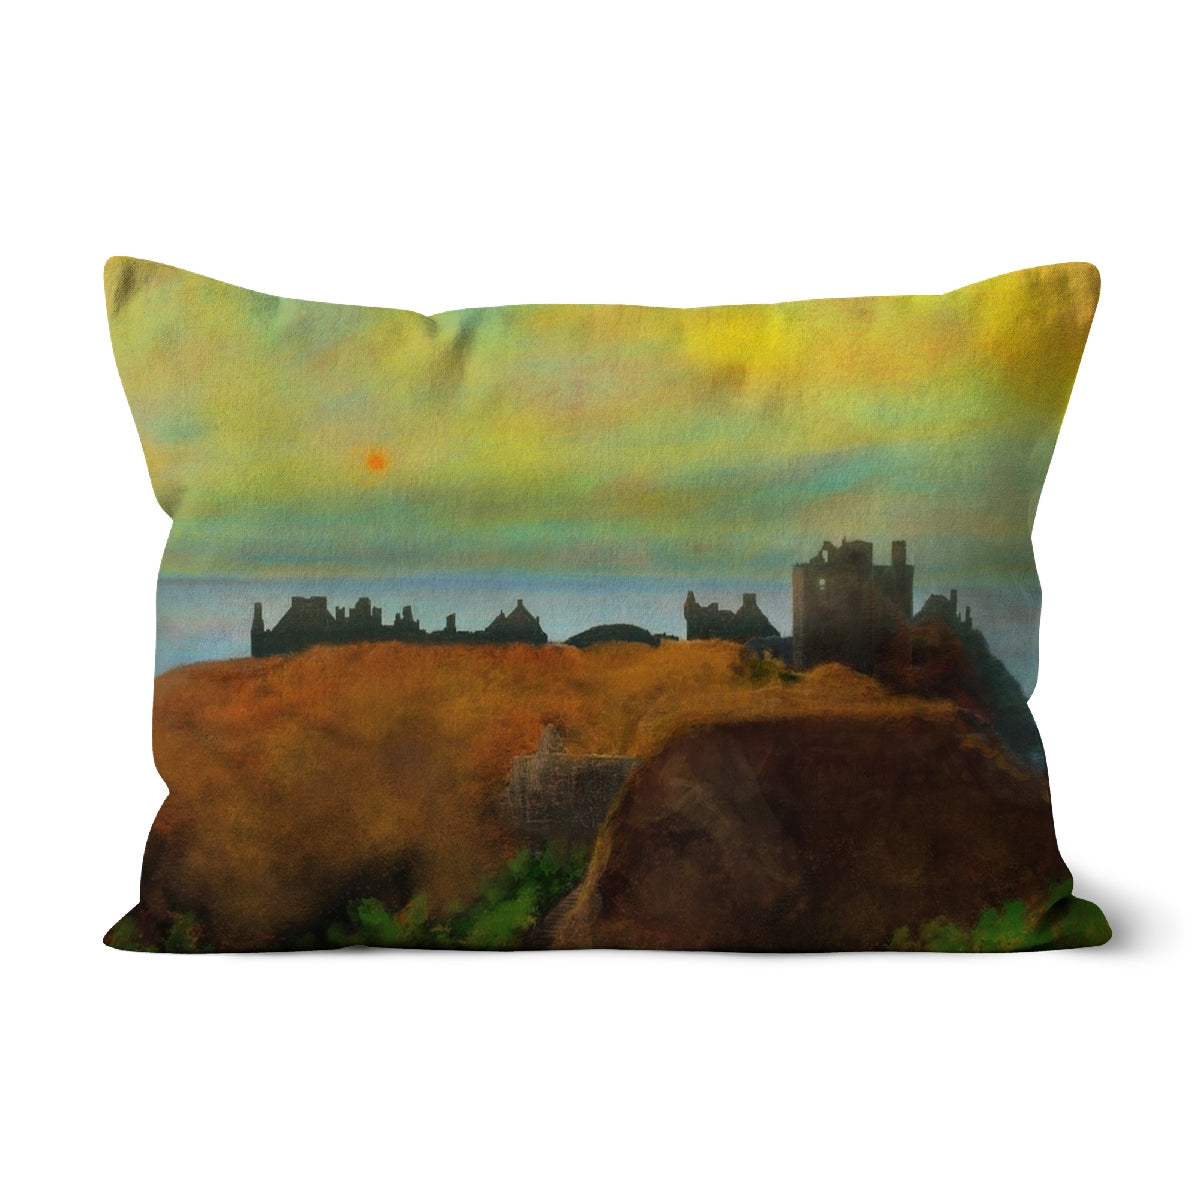 Dunnottar Castle Art Gifts Cushion-Cushions-Historic & Iconic Scotland Art Gallery-Linen-19"x13"-Paintings, Prints, Homeware, Art Gifts From Scotland By Scottish Artist Kevin Hunter